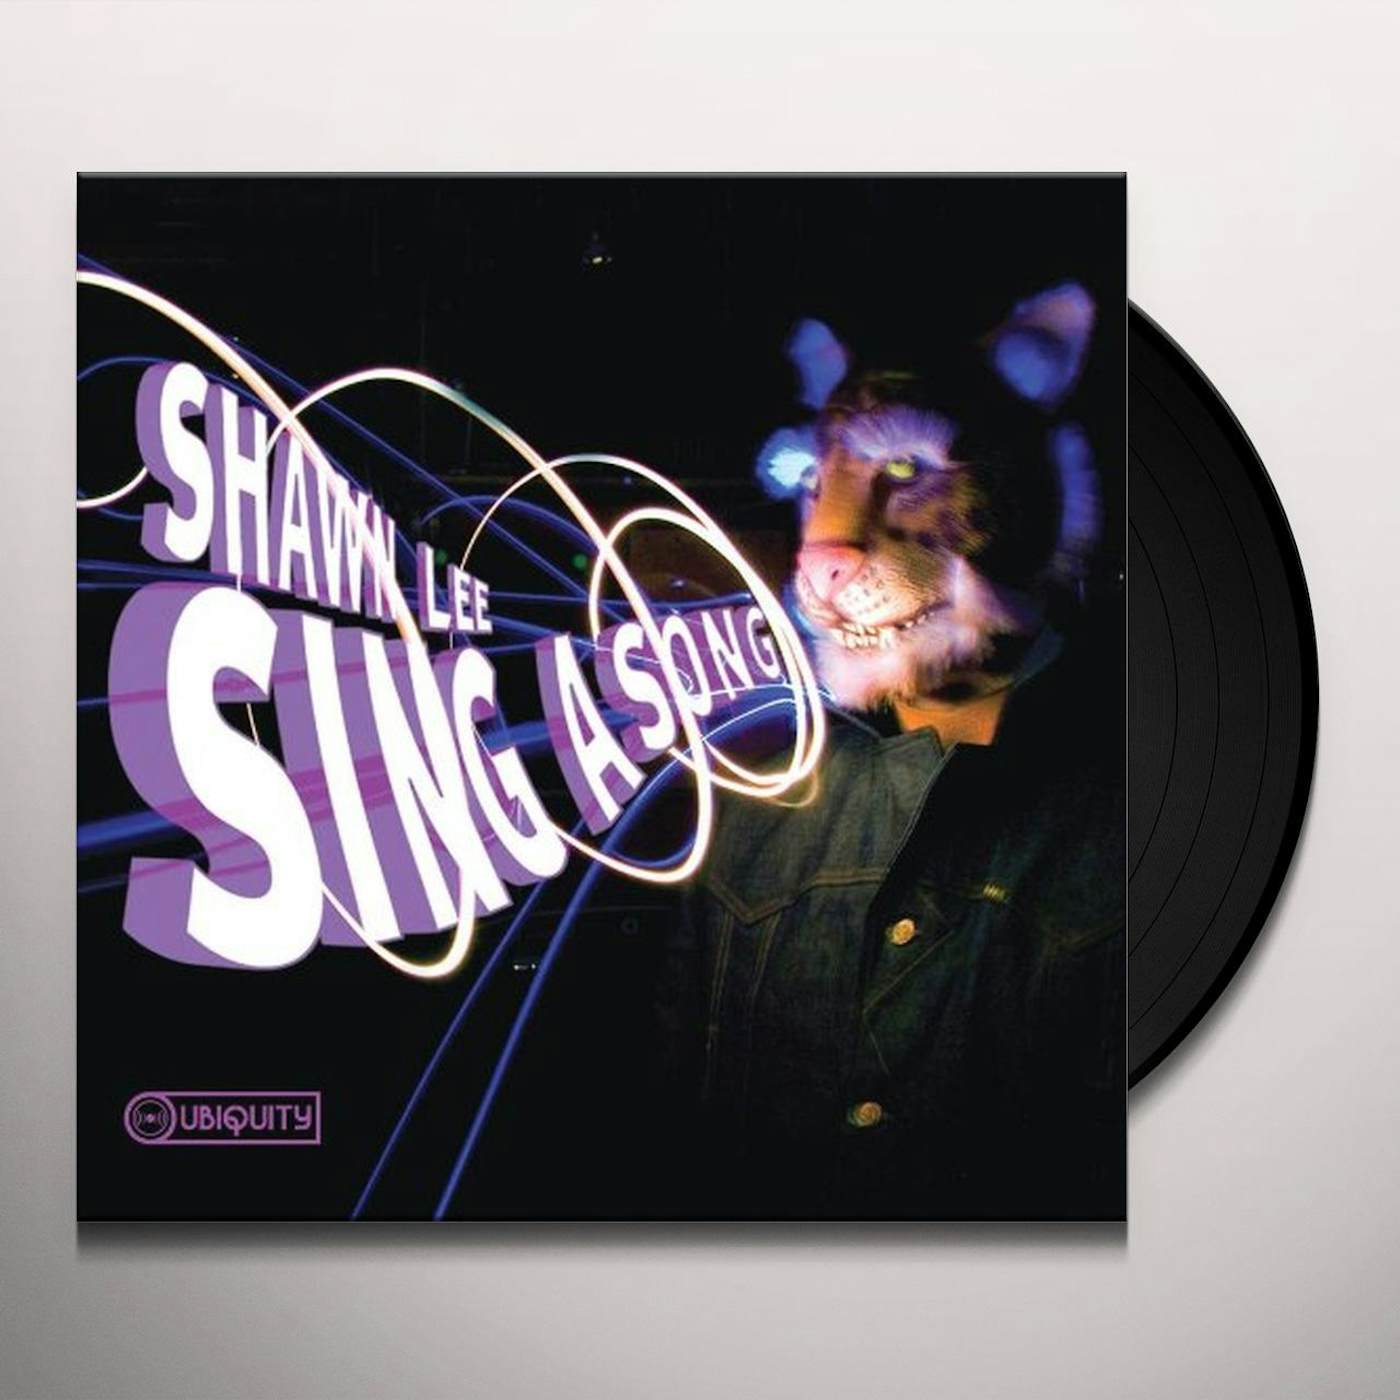 Shawn Lee Sing a Song Vinyl Record